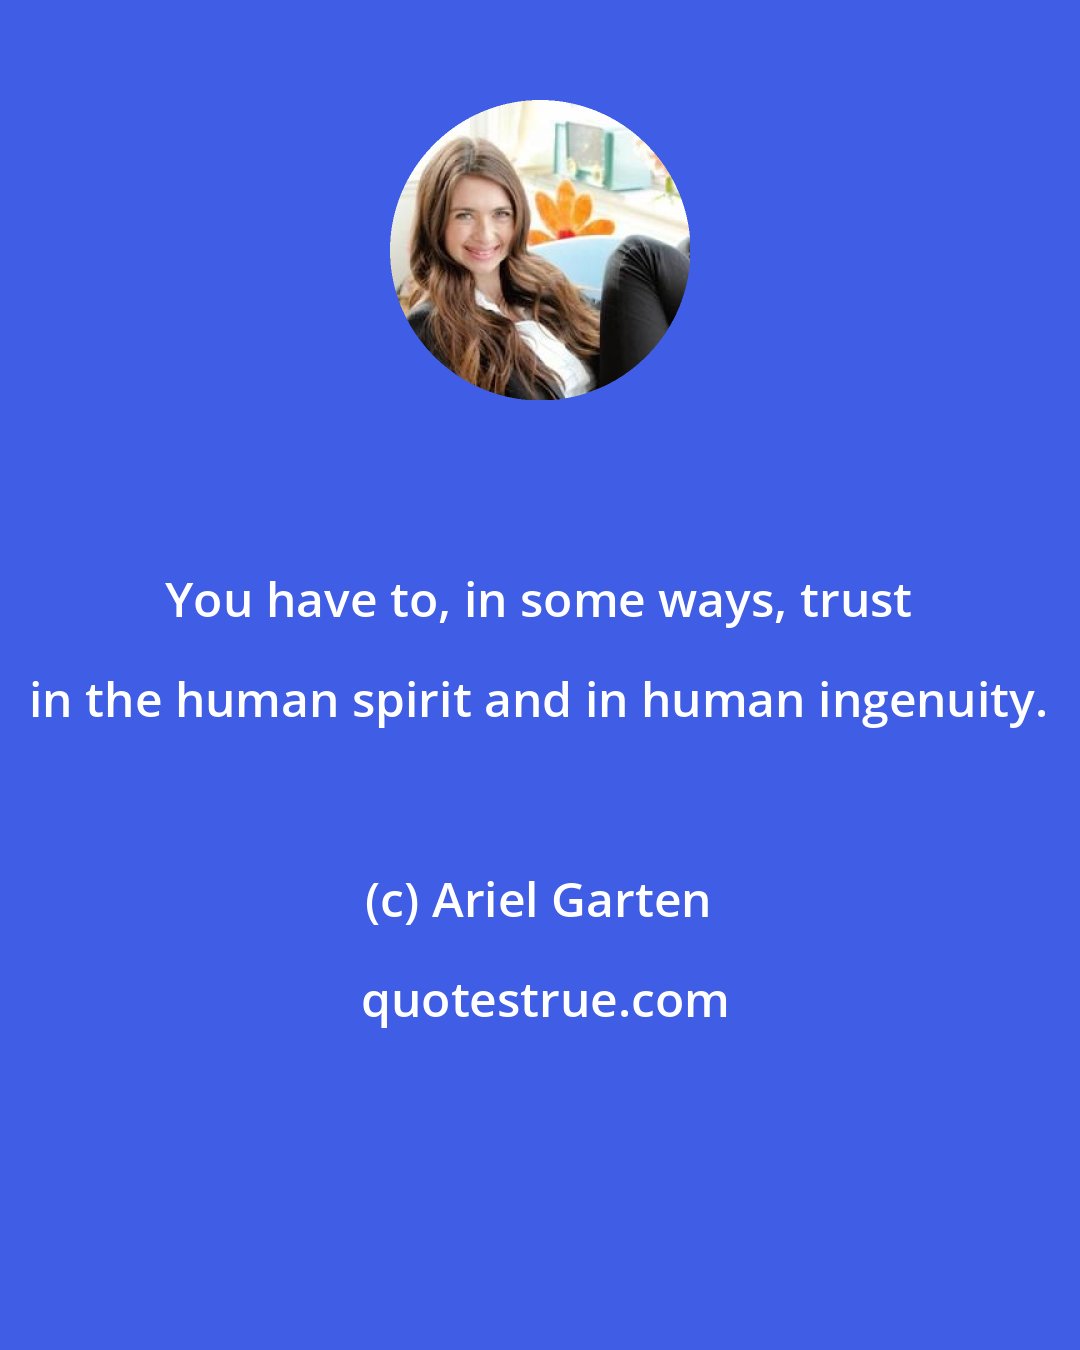 Ariel Garten: You have to, in some ways, trust in the human spirit and in human ingenuity.